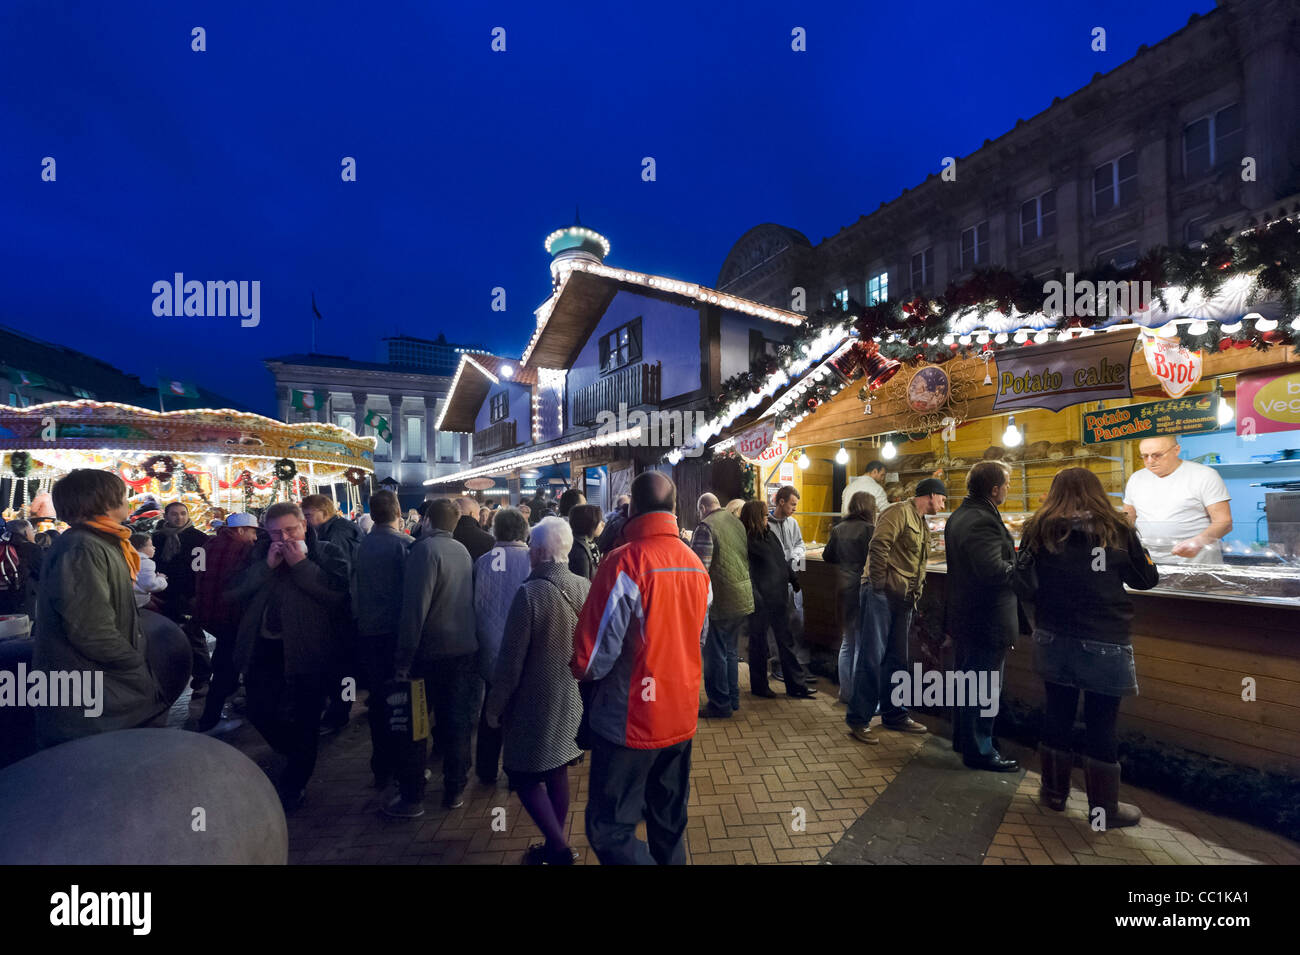 Food stalls in front of the Council House at the Frankfurt German Christmas Market, Victoria Square, Birmingham, UK Stock Photo